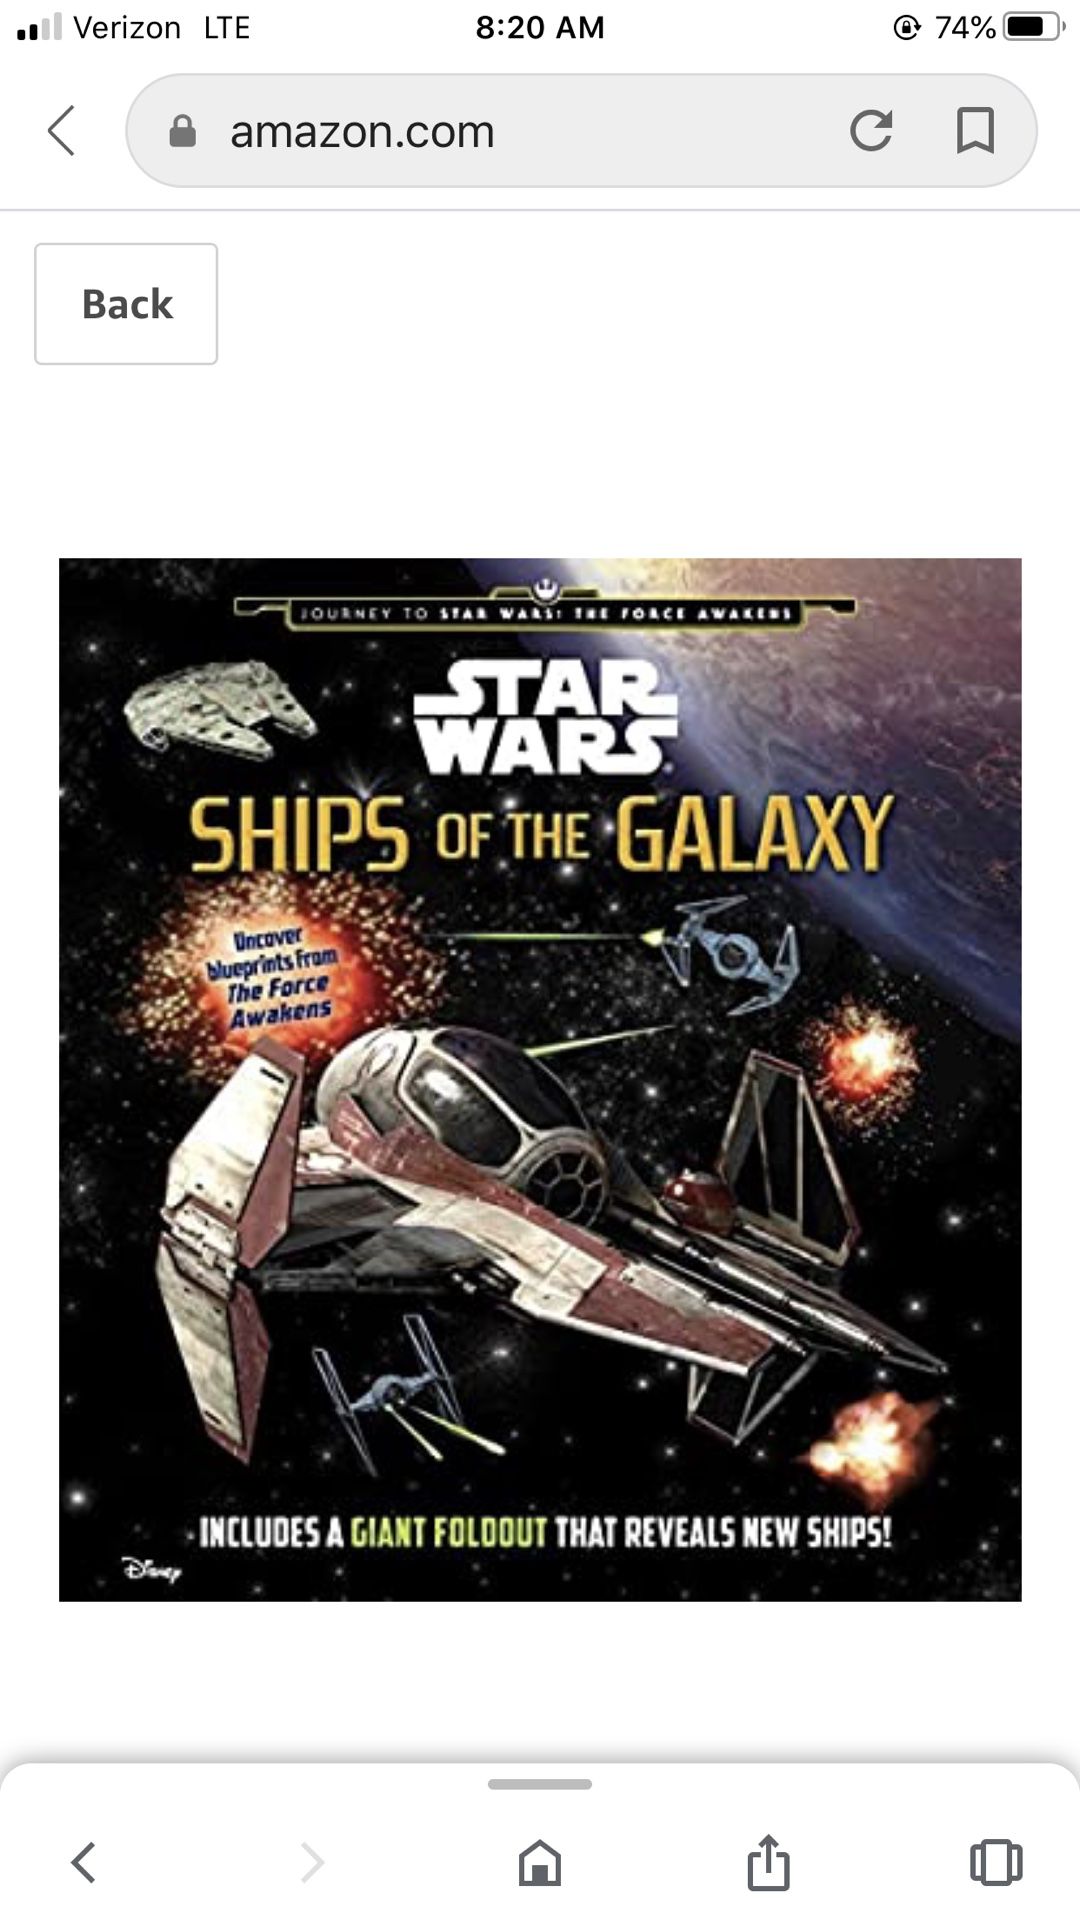 Star Wars: Ships of the Galaxy (Star Wars: Journey to Star Wars: The Force Awakens)